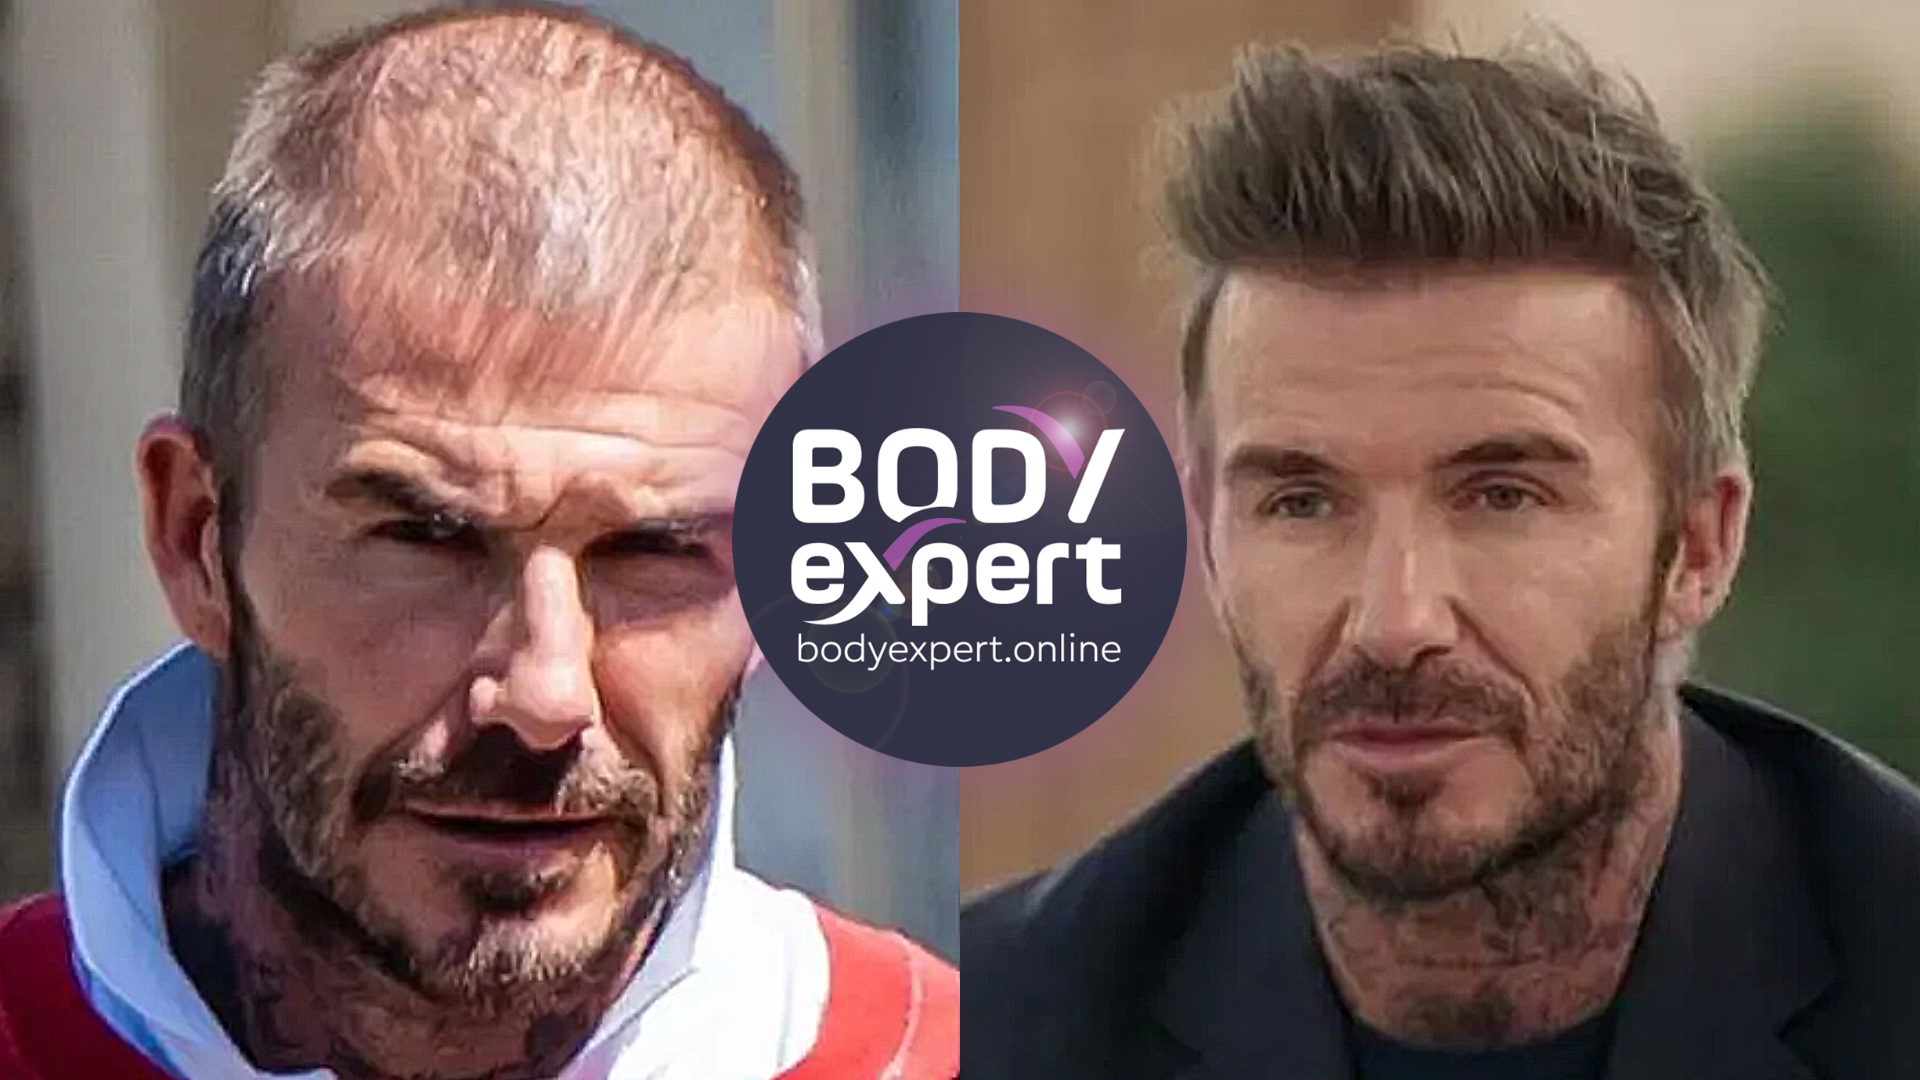 Hair transplant: which celebrity has a hair transplant?